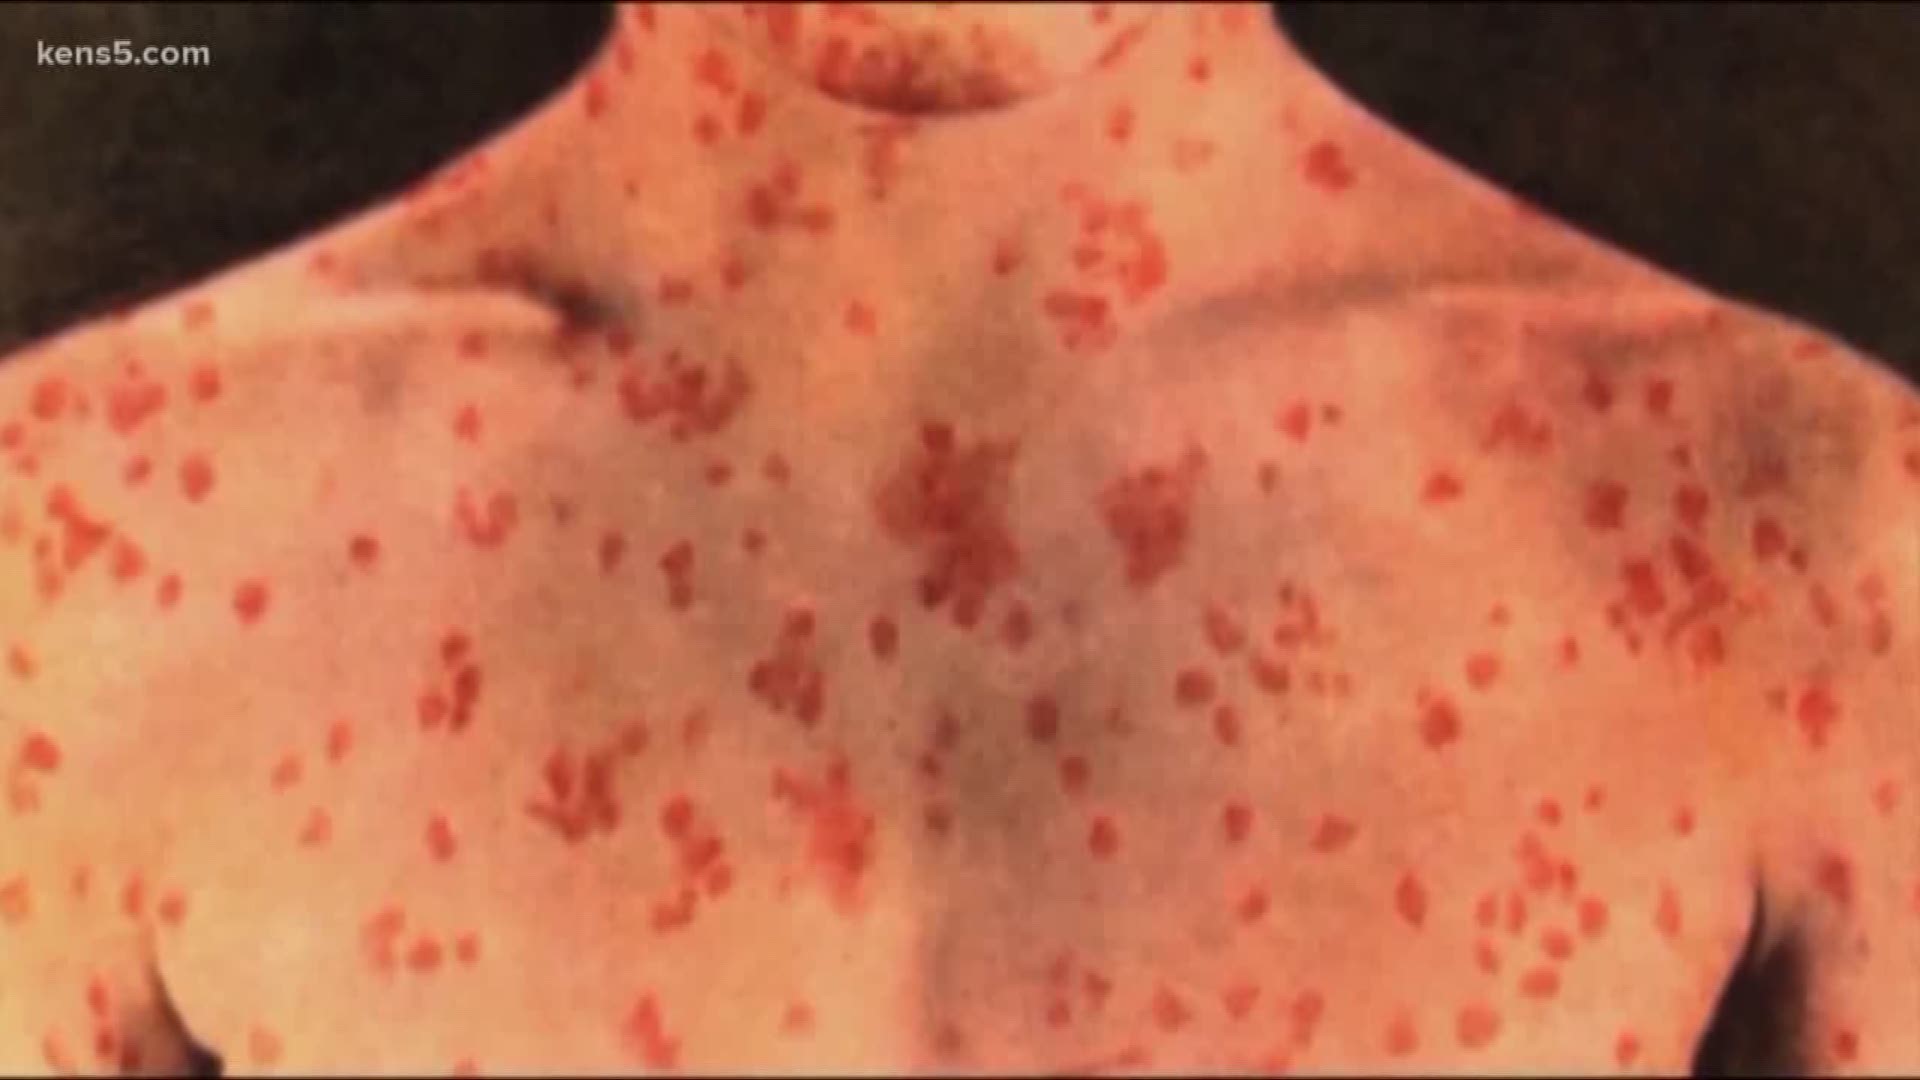 The San Antonio has its first diagnosis of the measles as the disease moves through several states, a University Health System spokesperson confirmed.